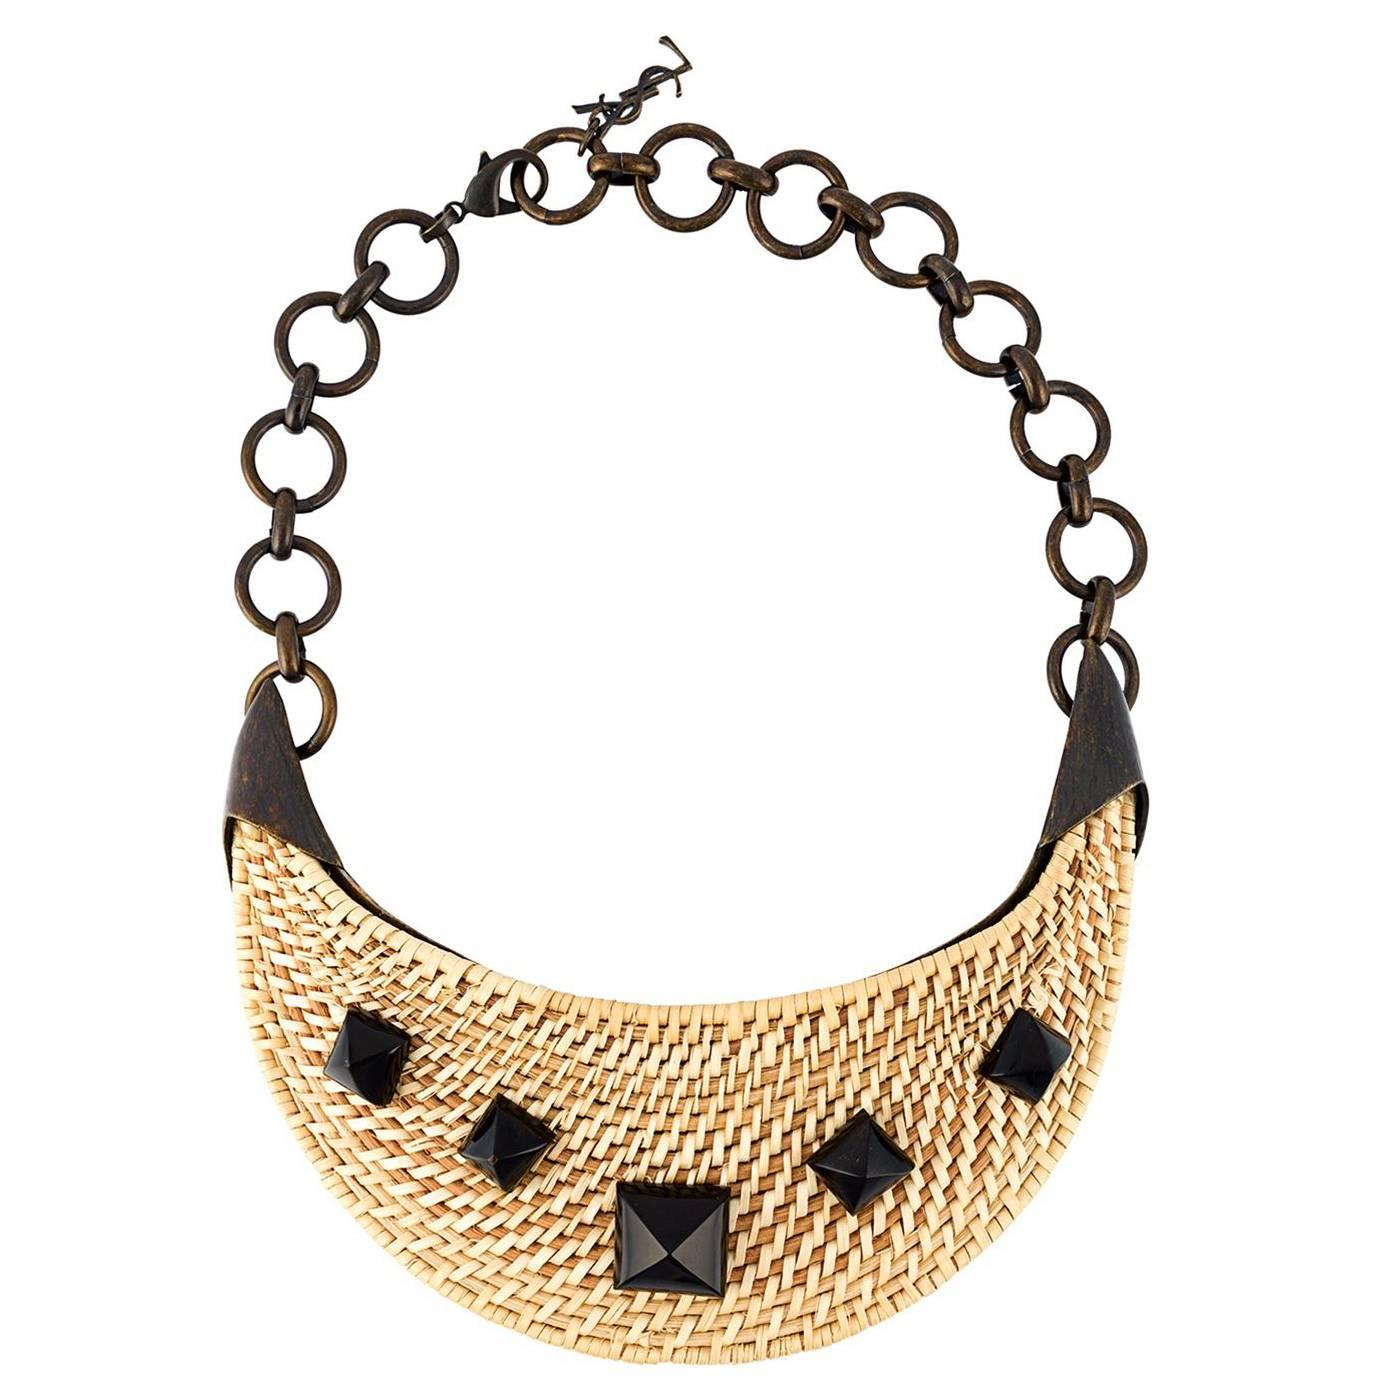 Statement YSLnecklace by Tom Ford c.2000 For Sale